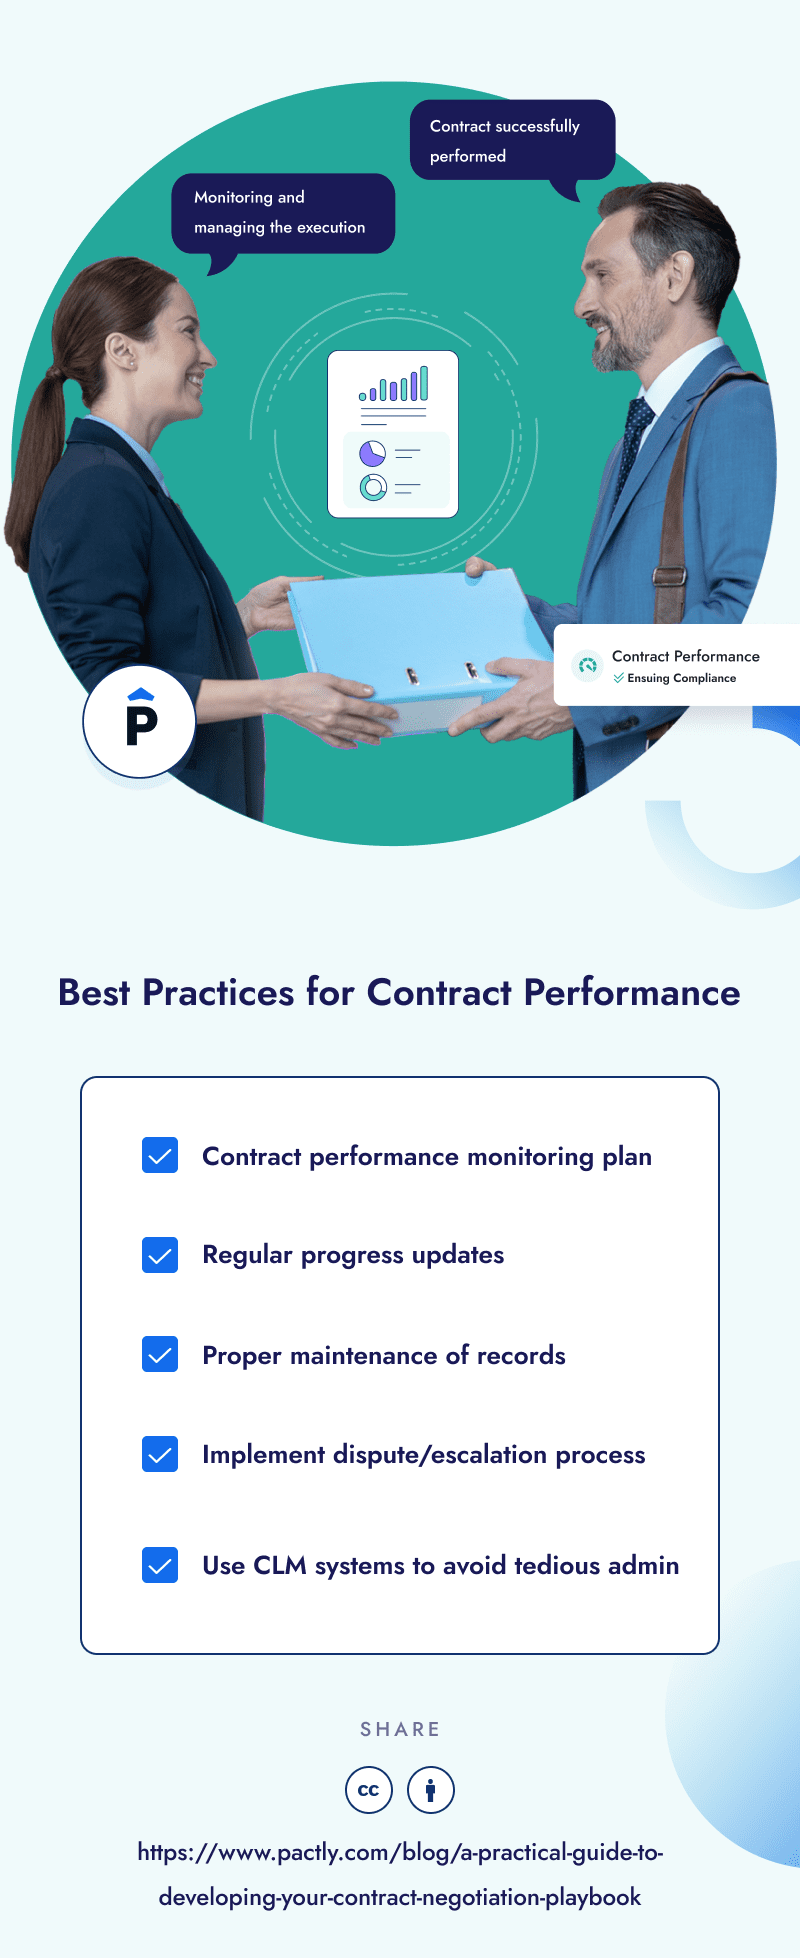 Best practices for contract performance